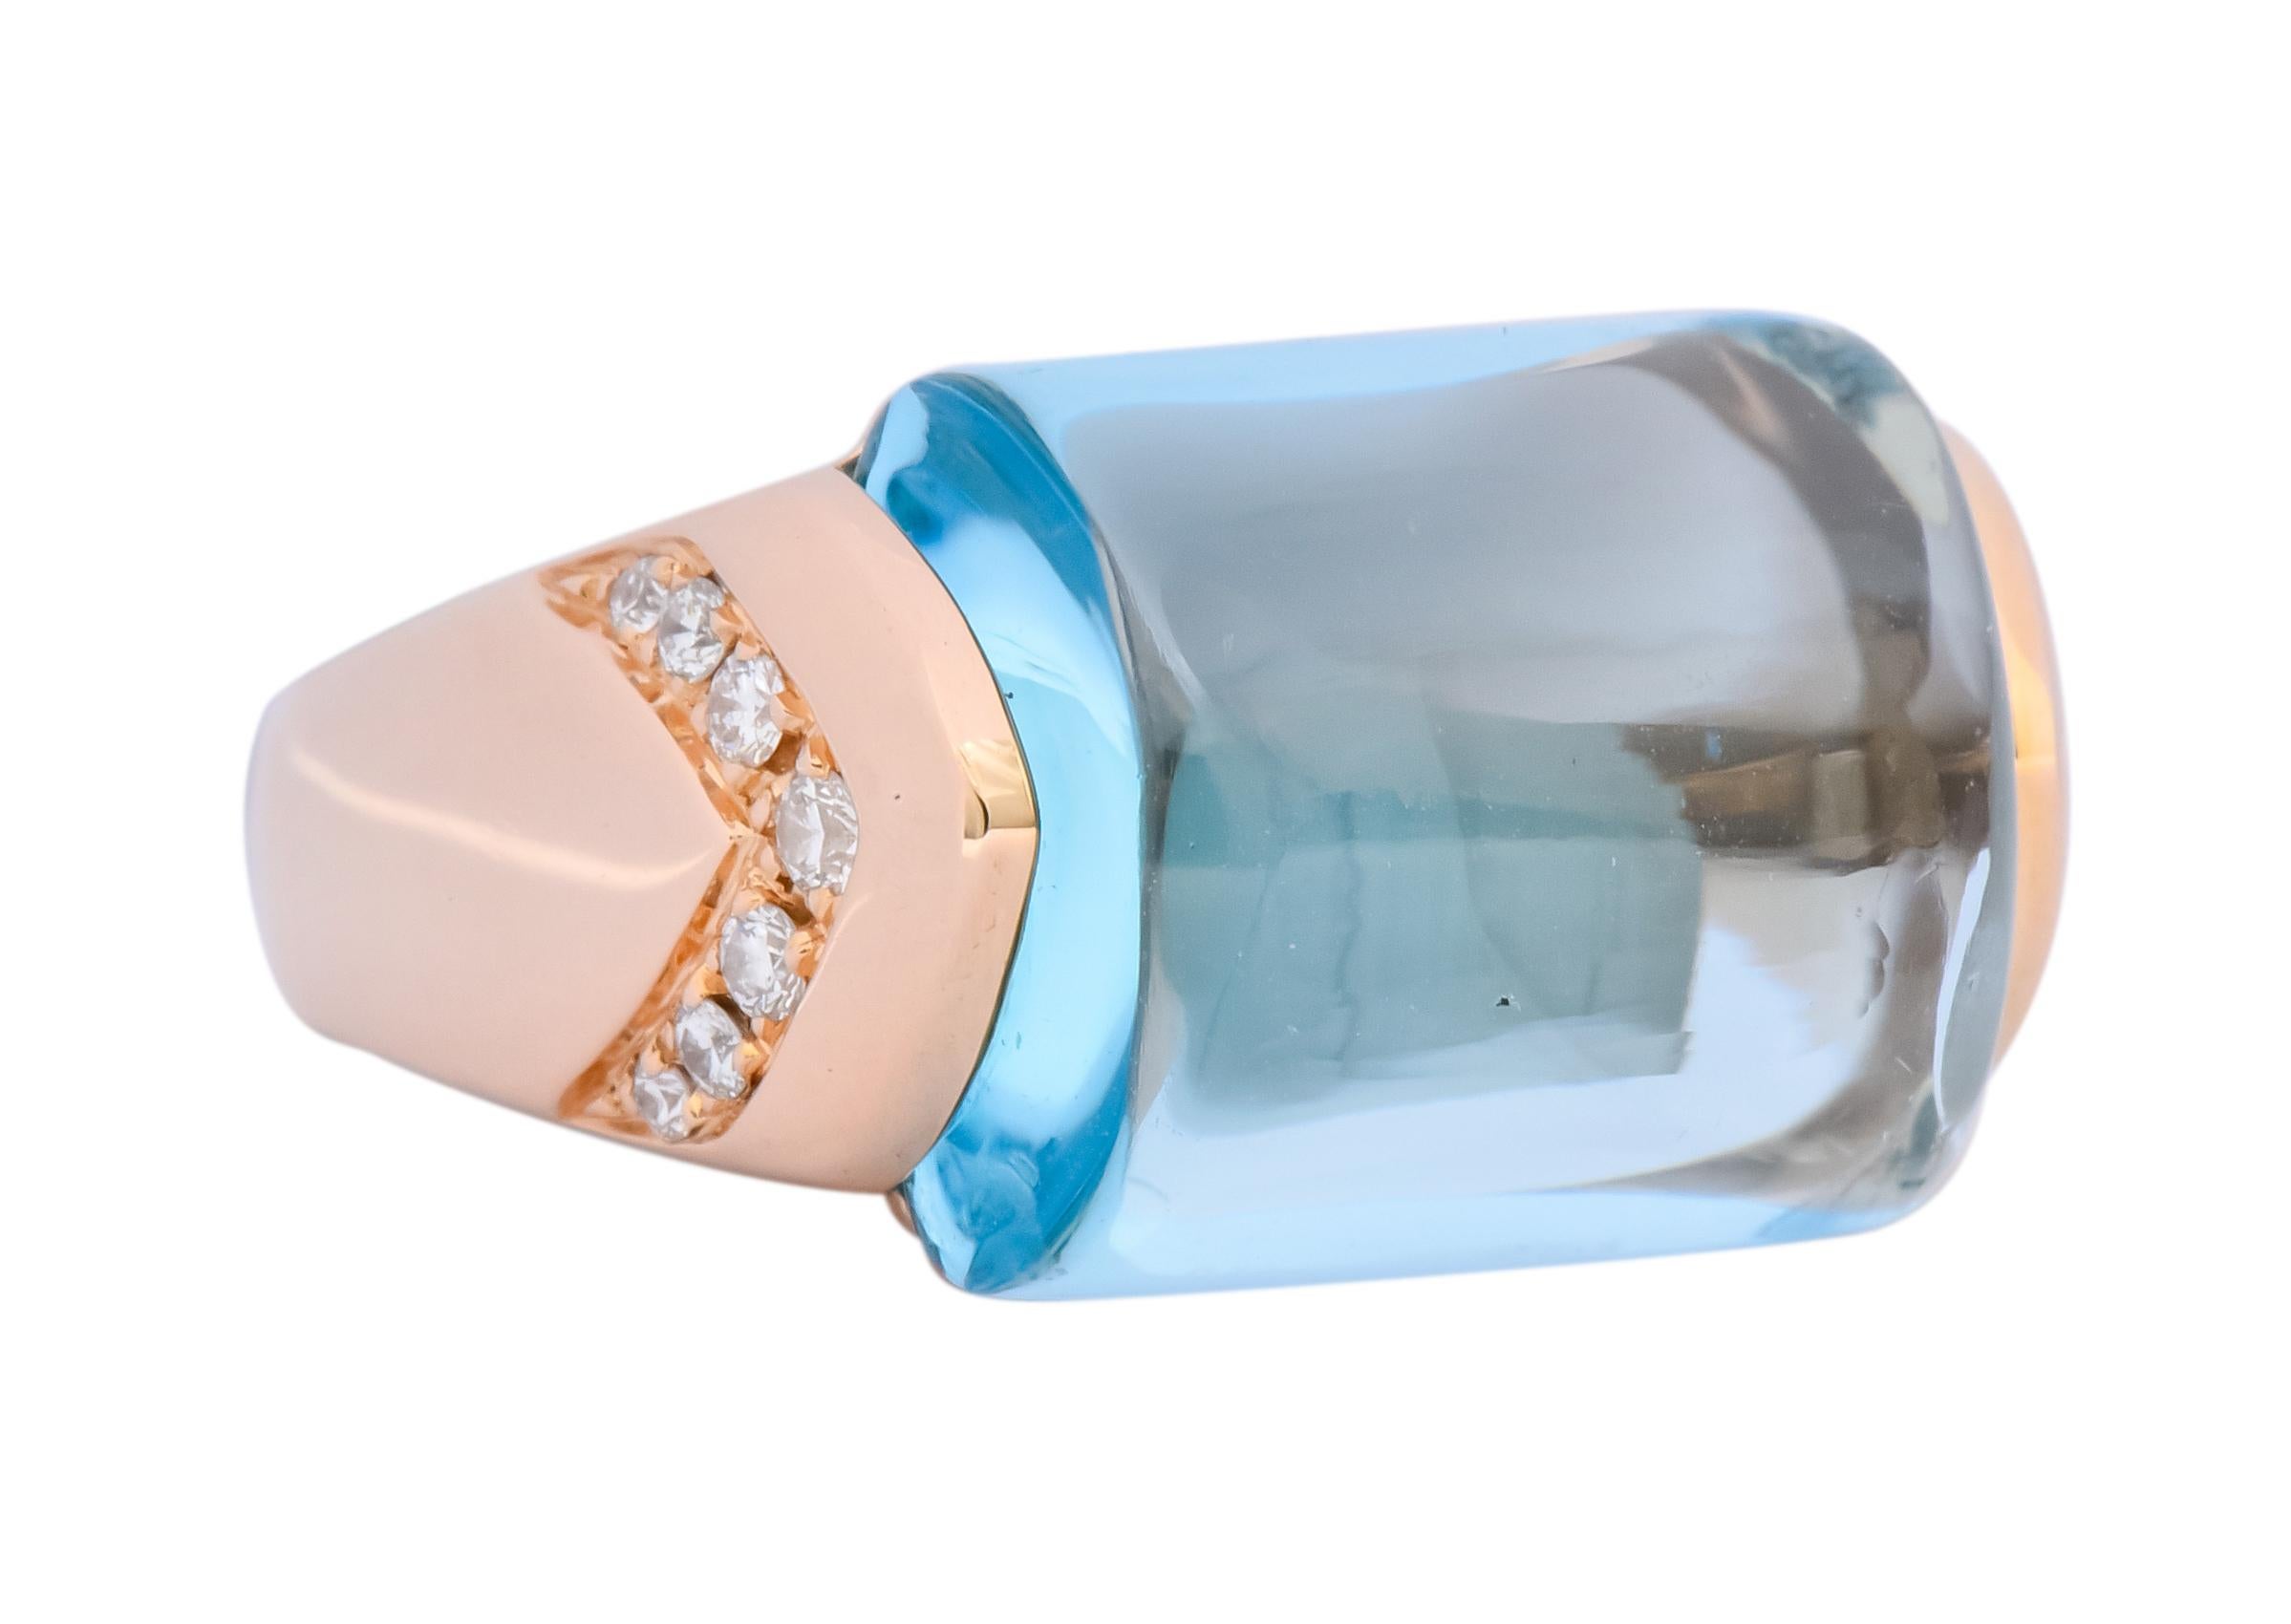 Centering a rectangular cabochon blue topaz weighing approximately 14.00 carats, transparent and very light blue in color

Flanked by high shoulders with bead set round brilliant cut diamonds, in a chevron motif, weighing approximately 0.24 carat